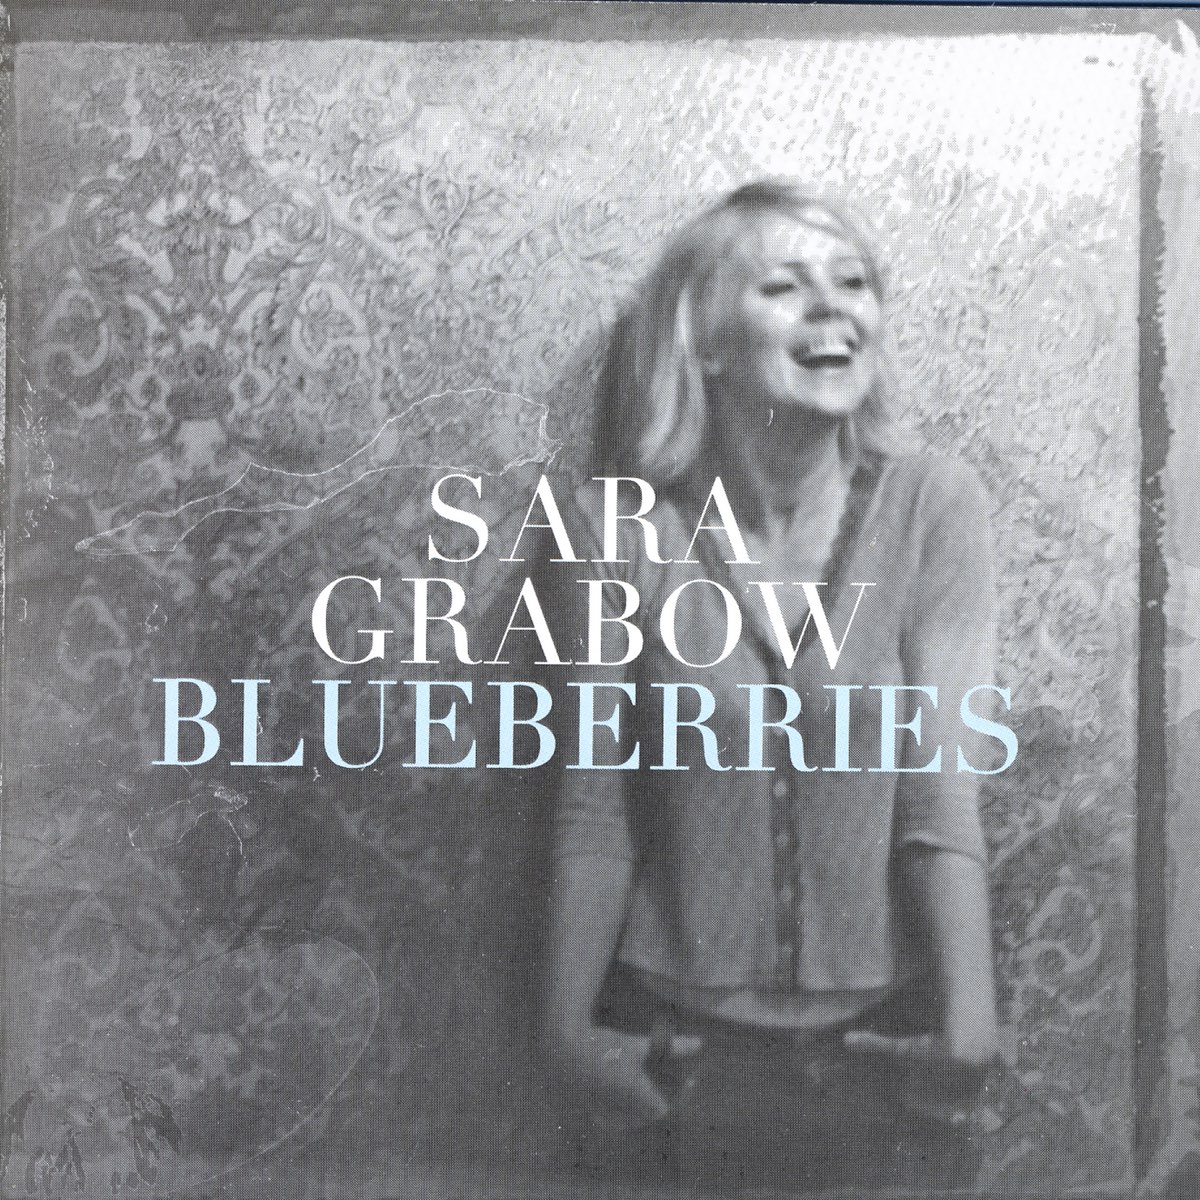 Blueberries by Sara Grabow on Apple Music